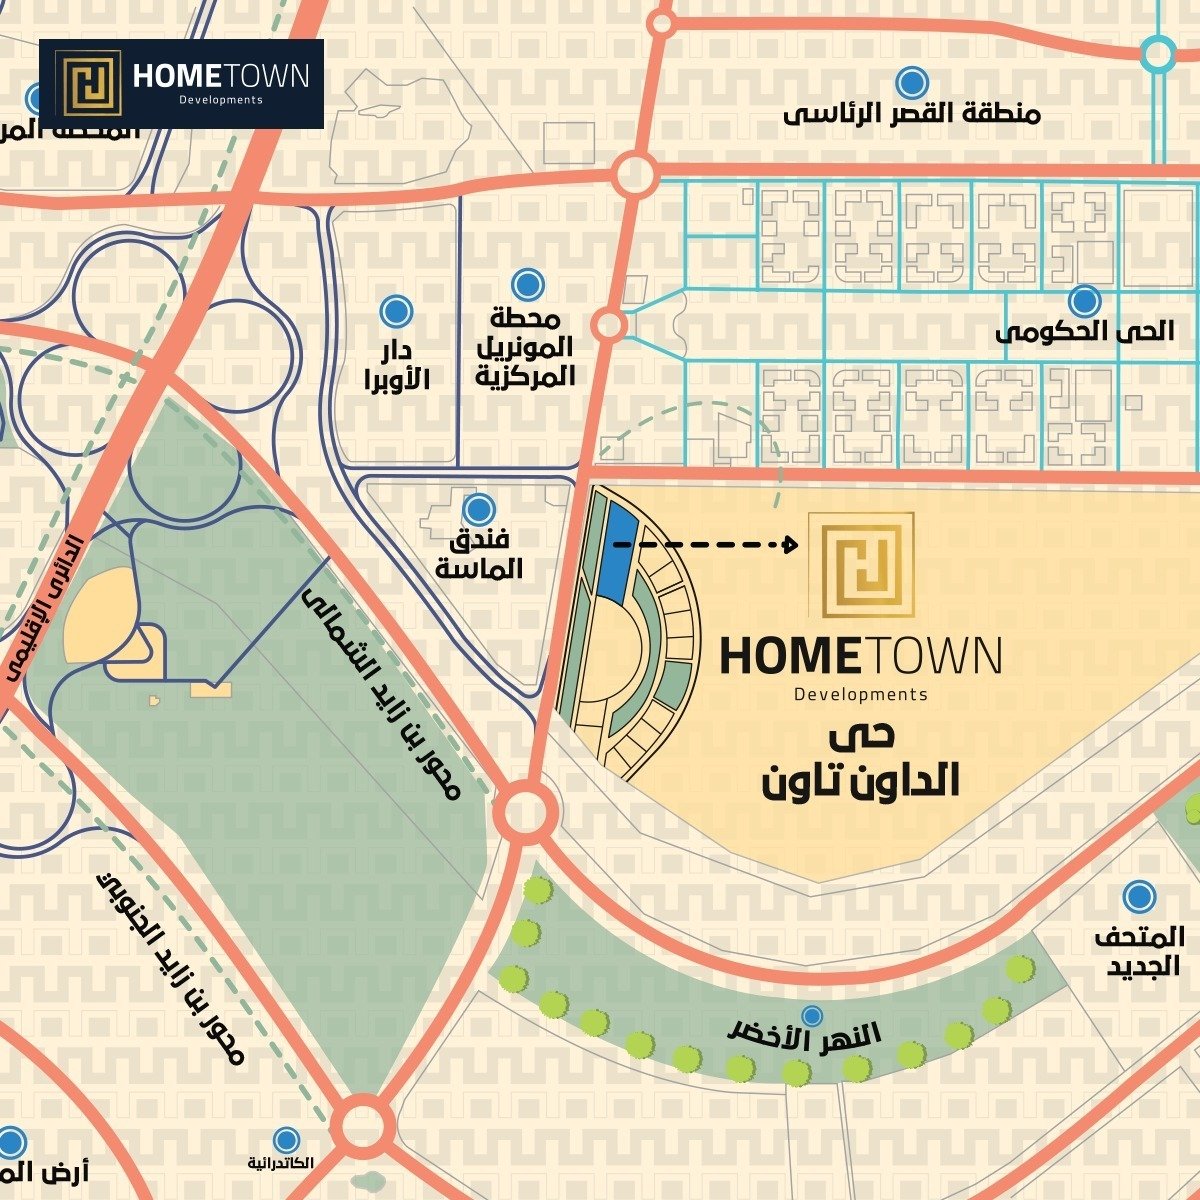 Find out the price of a shop with an area of ​​75 meters in Lafayette Mall, the Administrative Capital